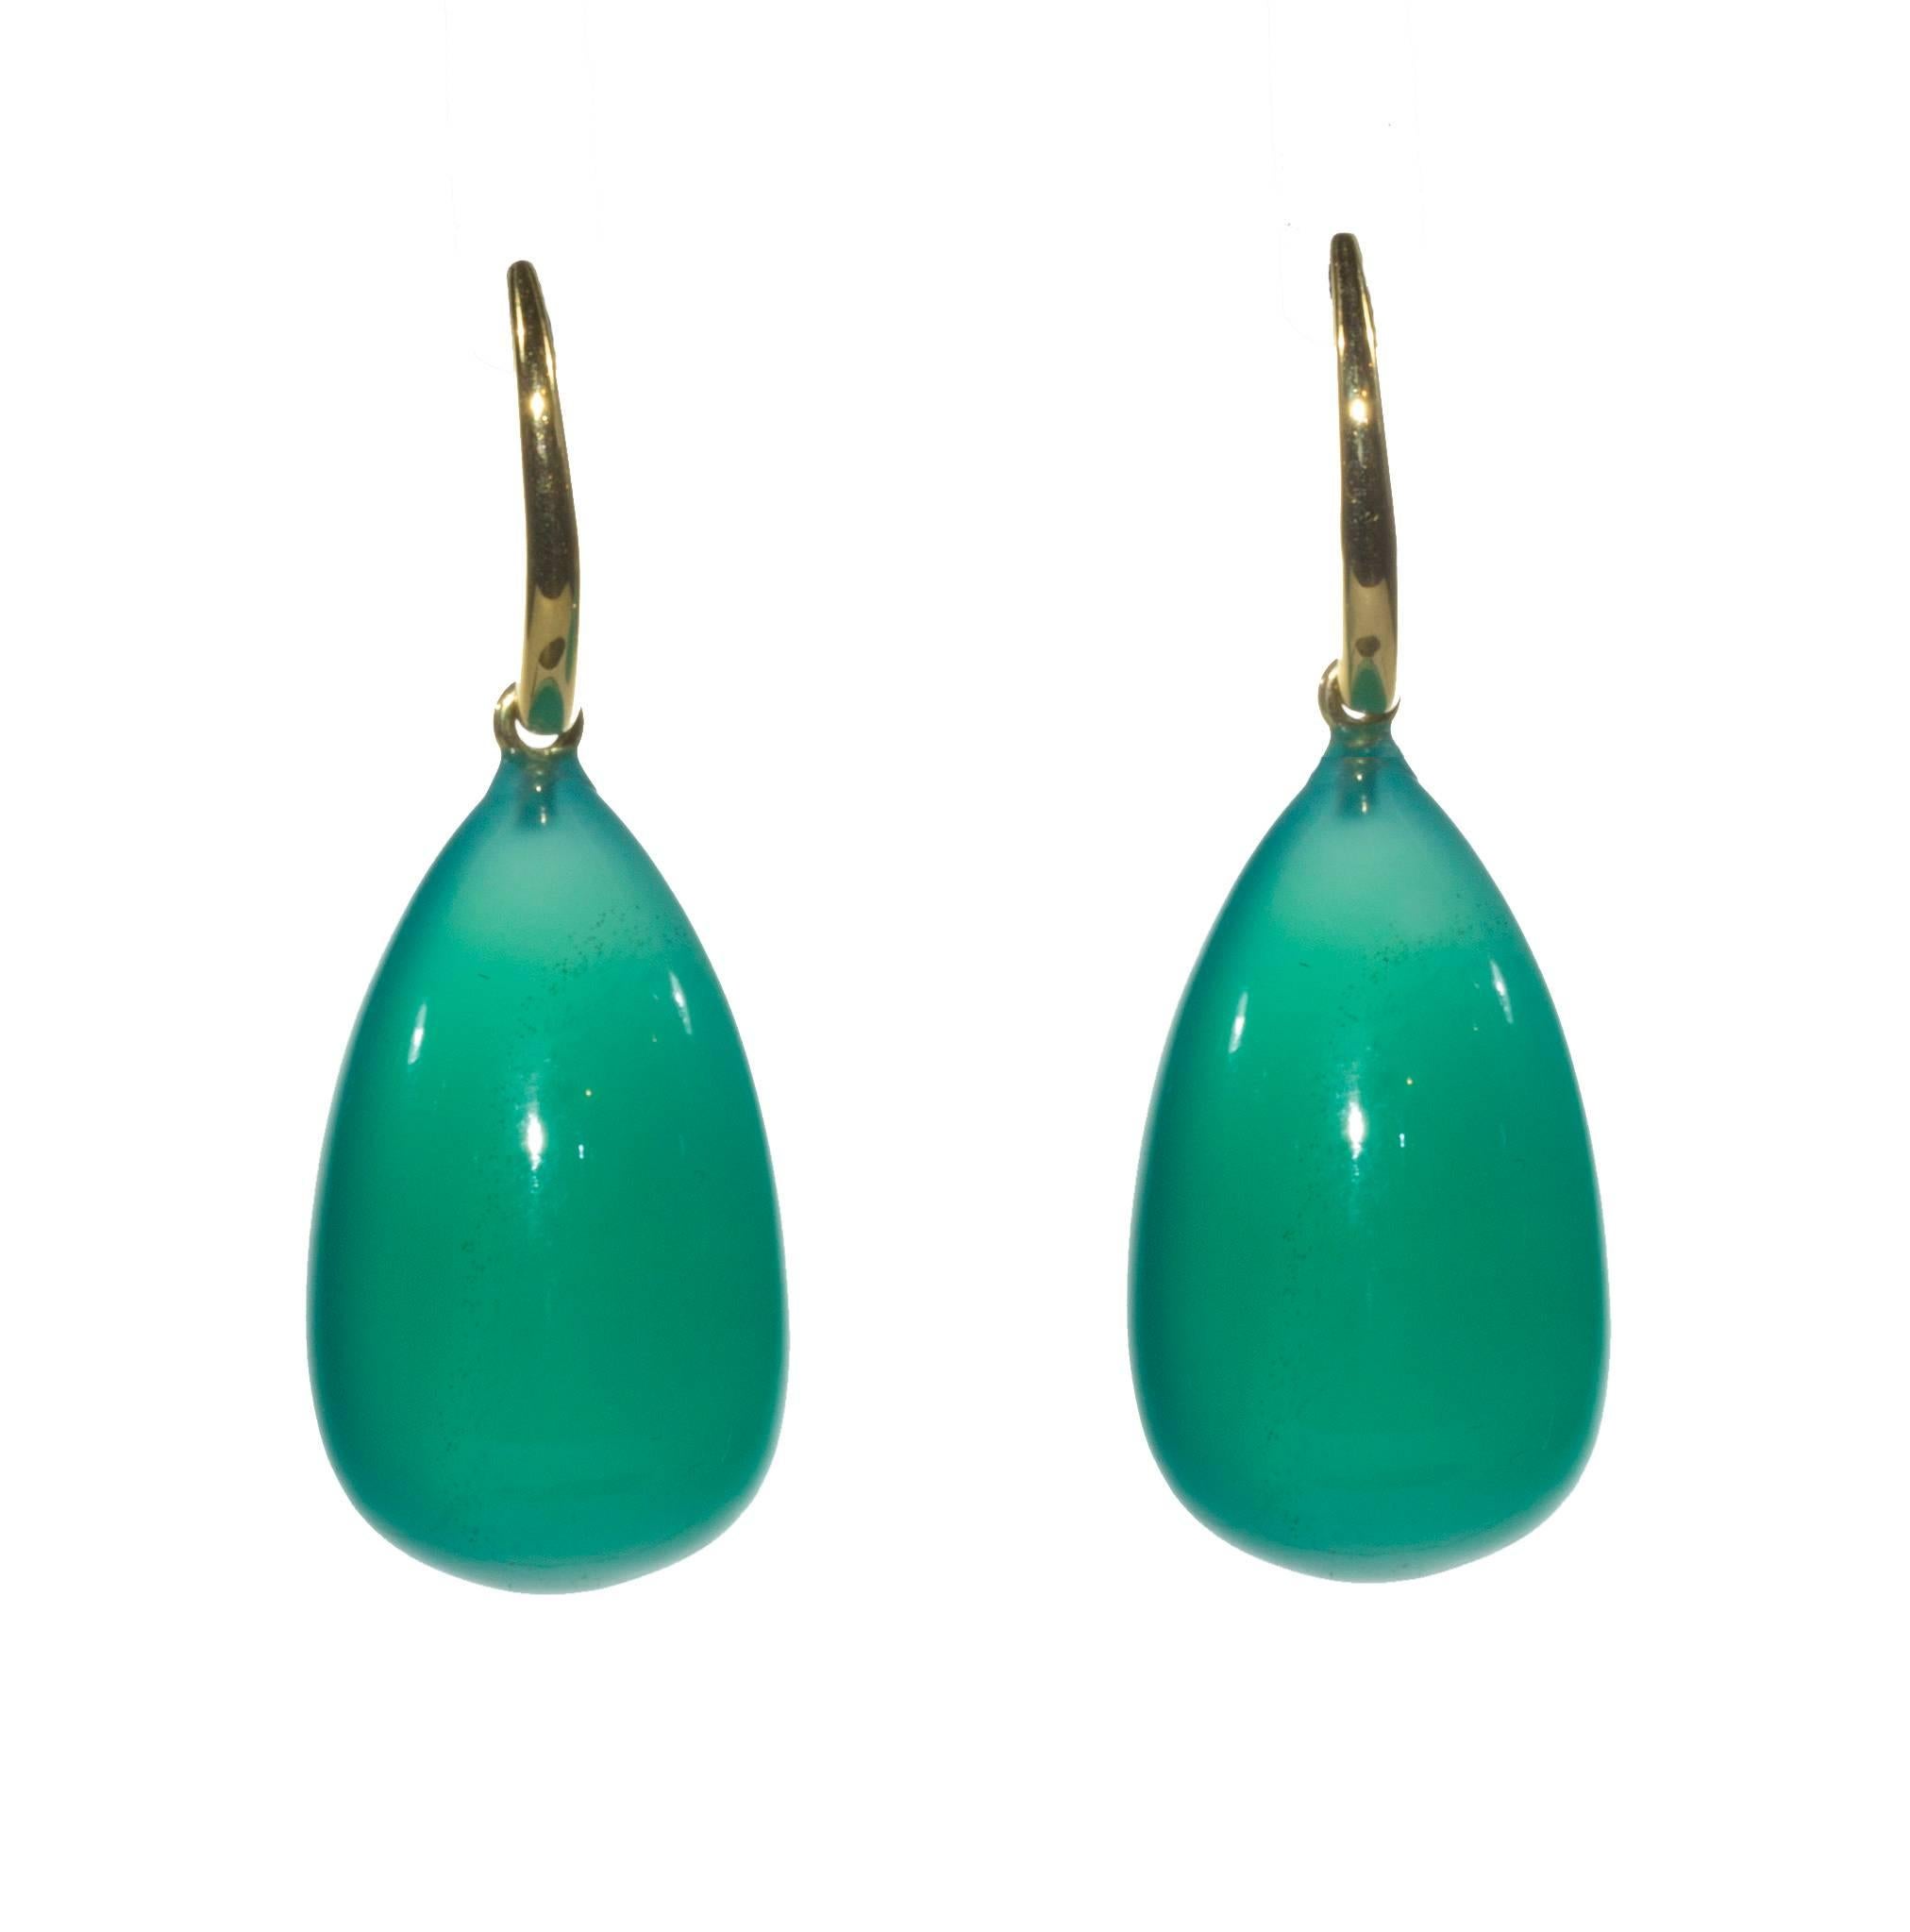 Translucent green agate and 18K gold drop earrings. Cut as a smooth briolette, due to the perfection of the stone (no veins or inclusions of any kind) they become pools of light next to the face of the wearer. The stones are perfectly balanced on